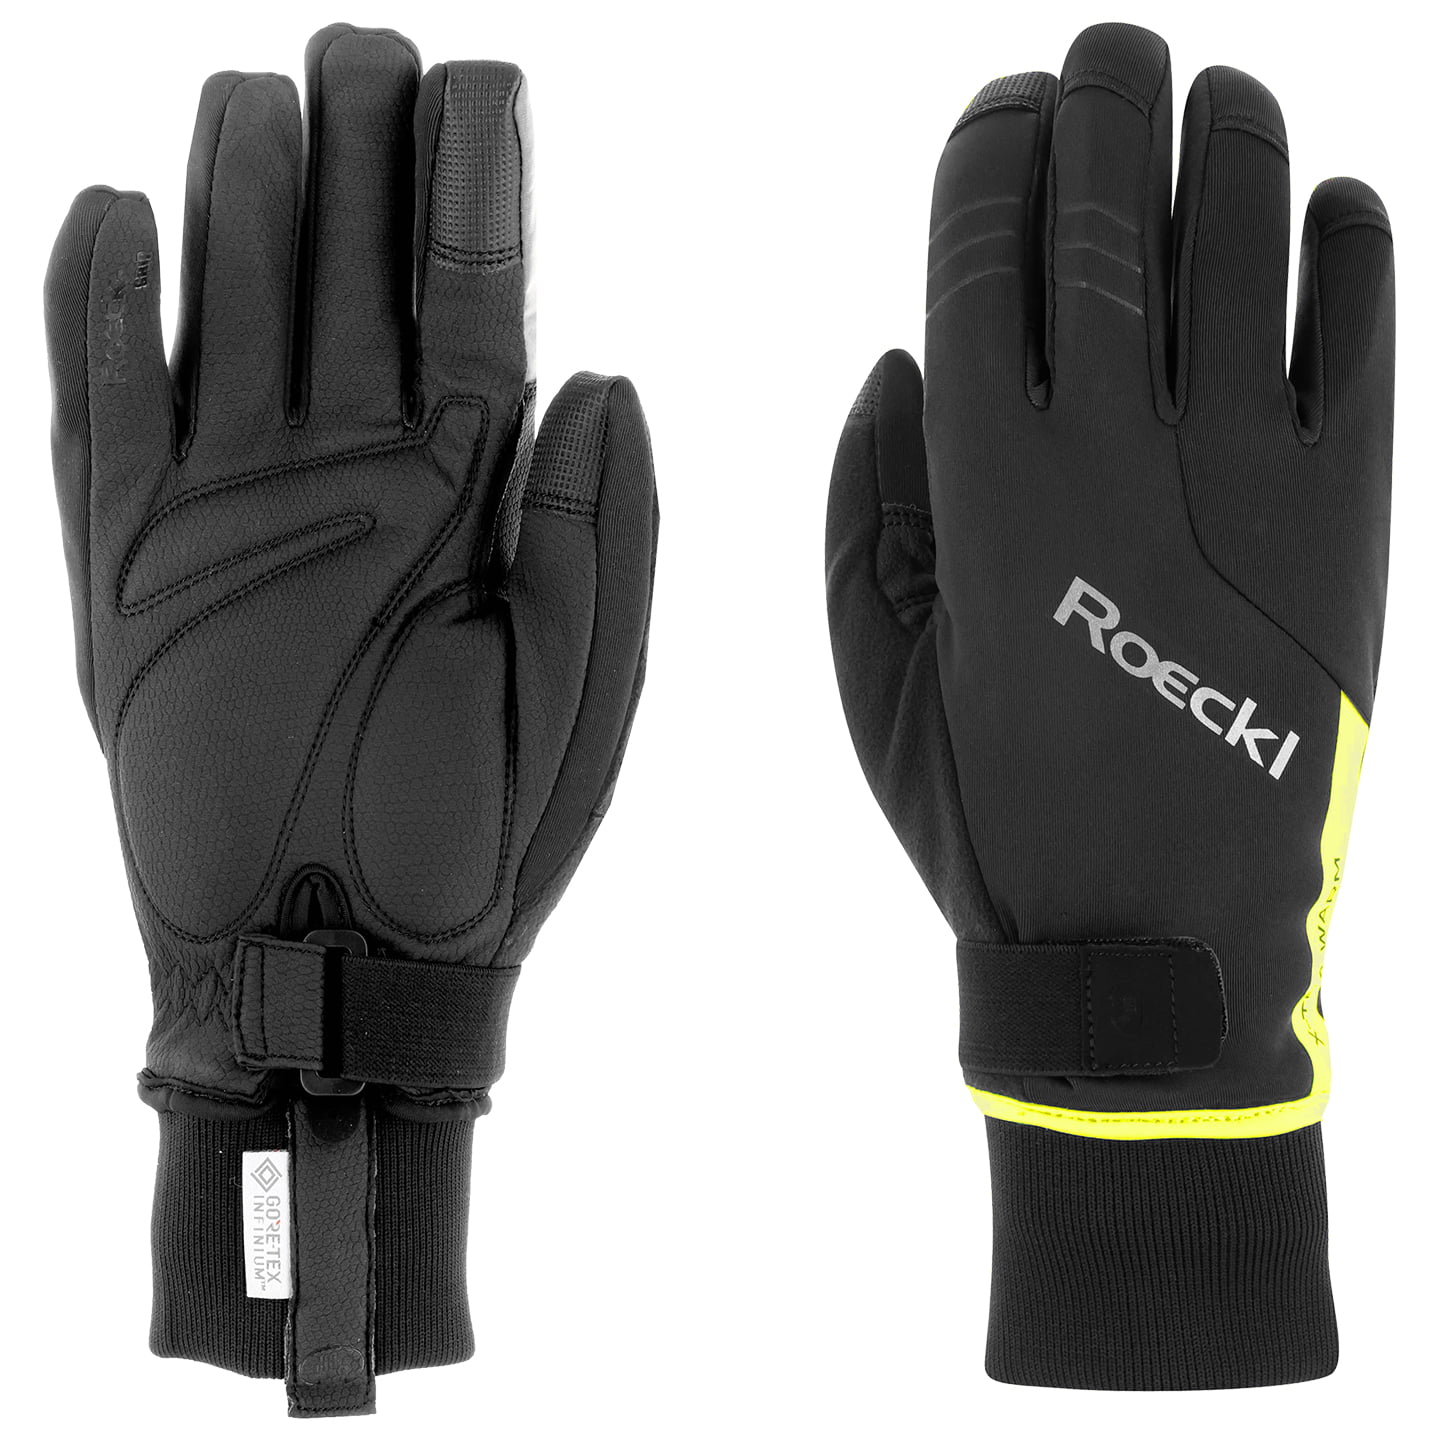 ROECKL Villach 2 Winter Gloves Winter Cycling Gloves, for men, size 8,5, MTB gloves, Cycling apparel